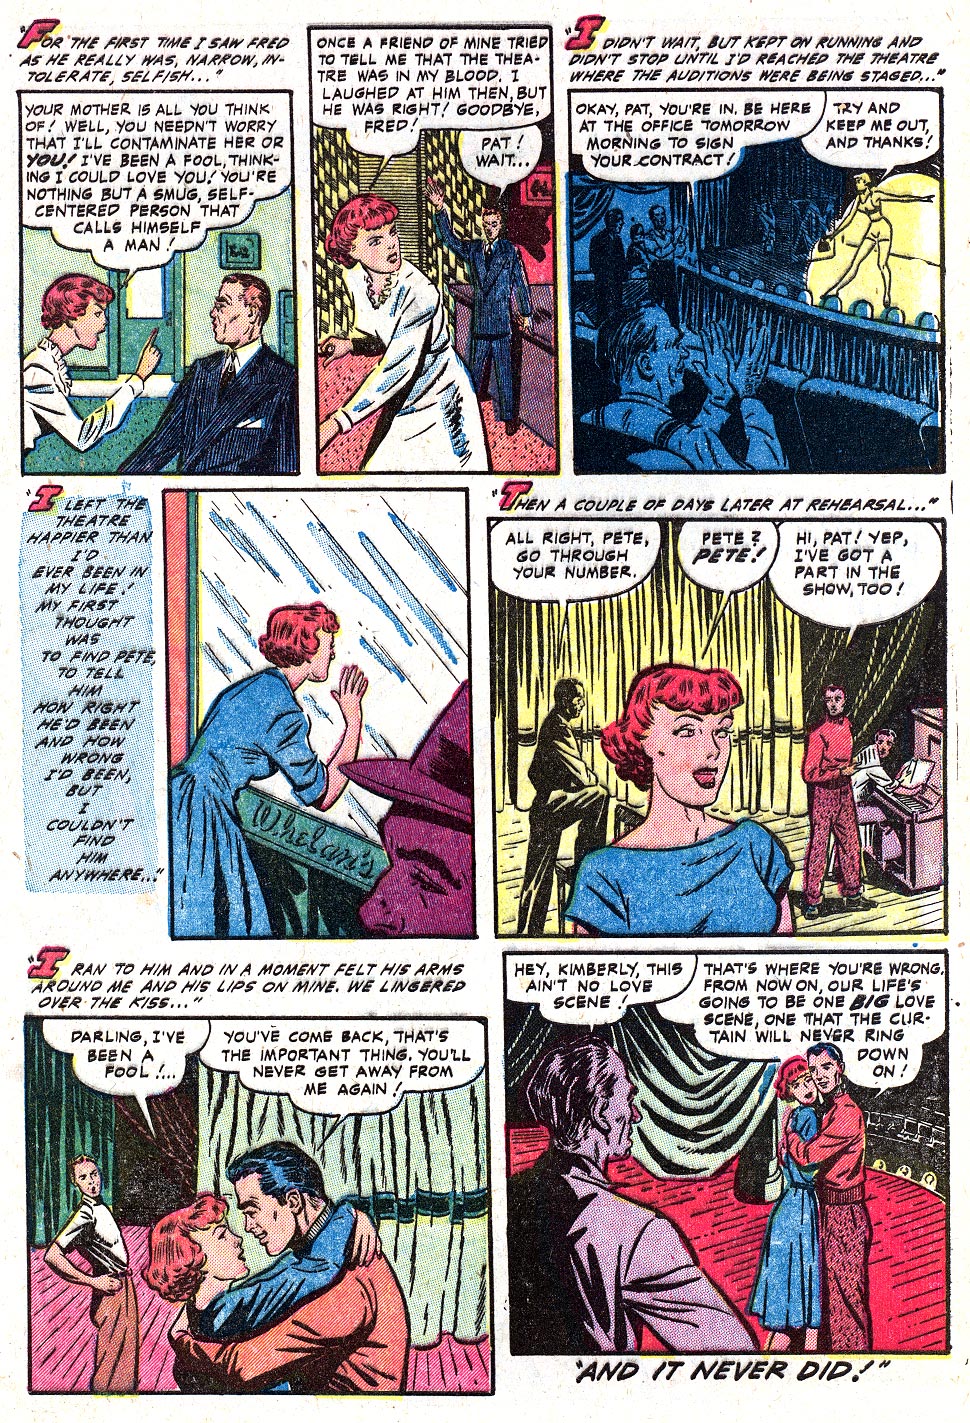 Romantic Love (1958) issue 3 - Page 9